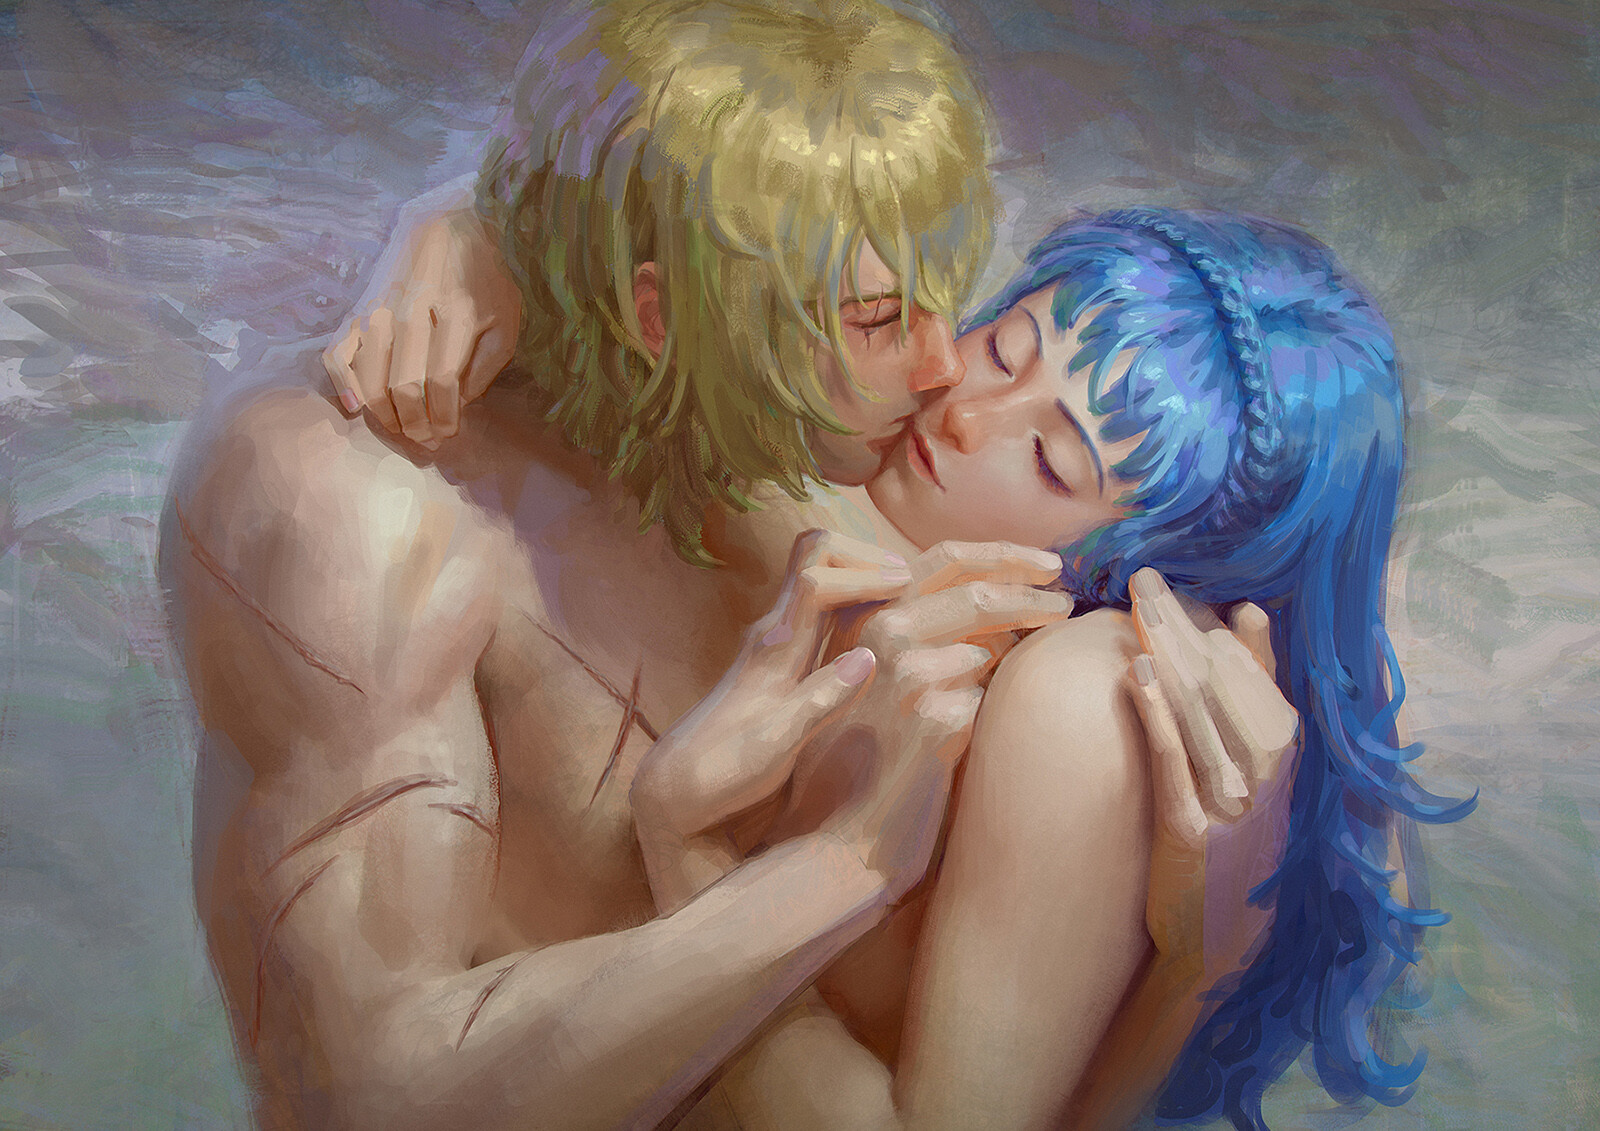 Dimitri and Marianne from Fire Emblem Three Houses. 